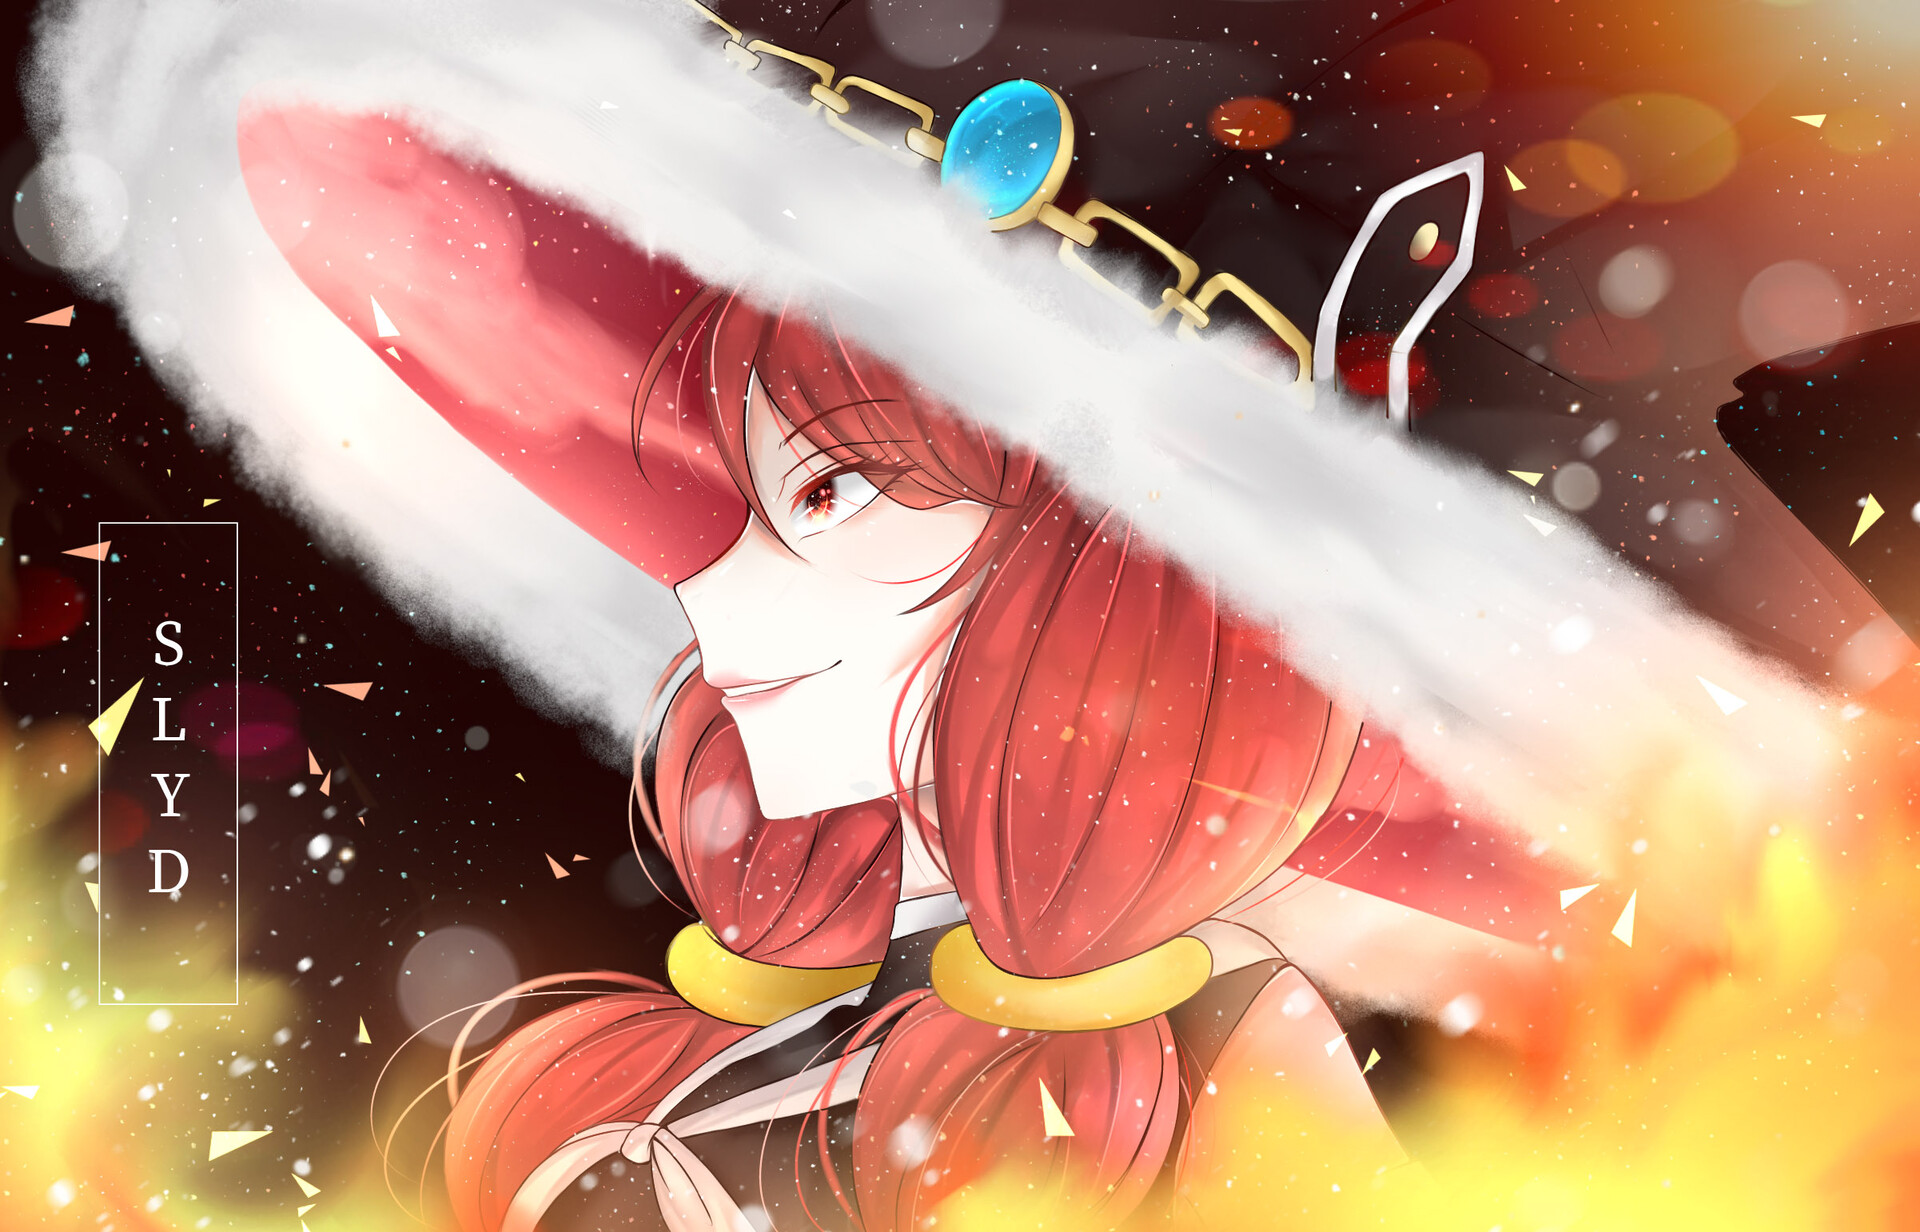 The best mother I know in Fairy Tail - Fanart Irene Belserion.